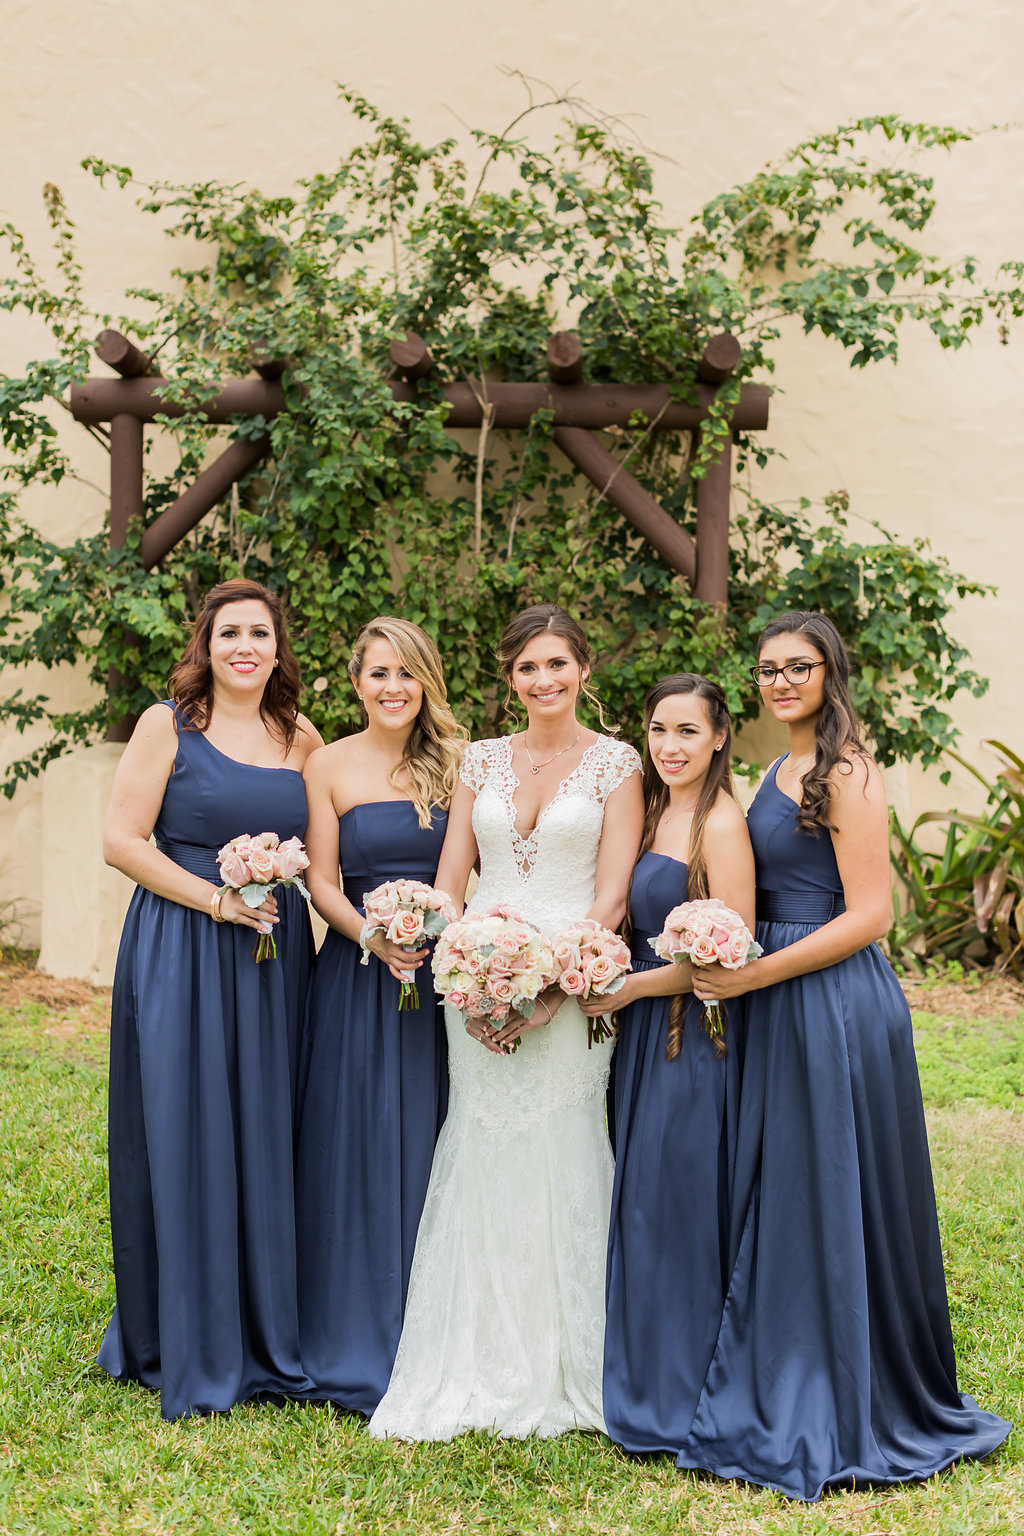 The bridesmaids wore long navy dresses